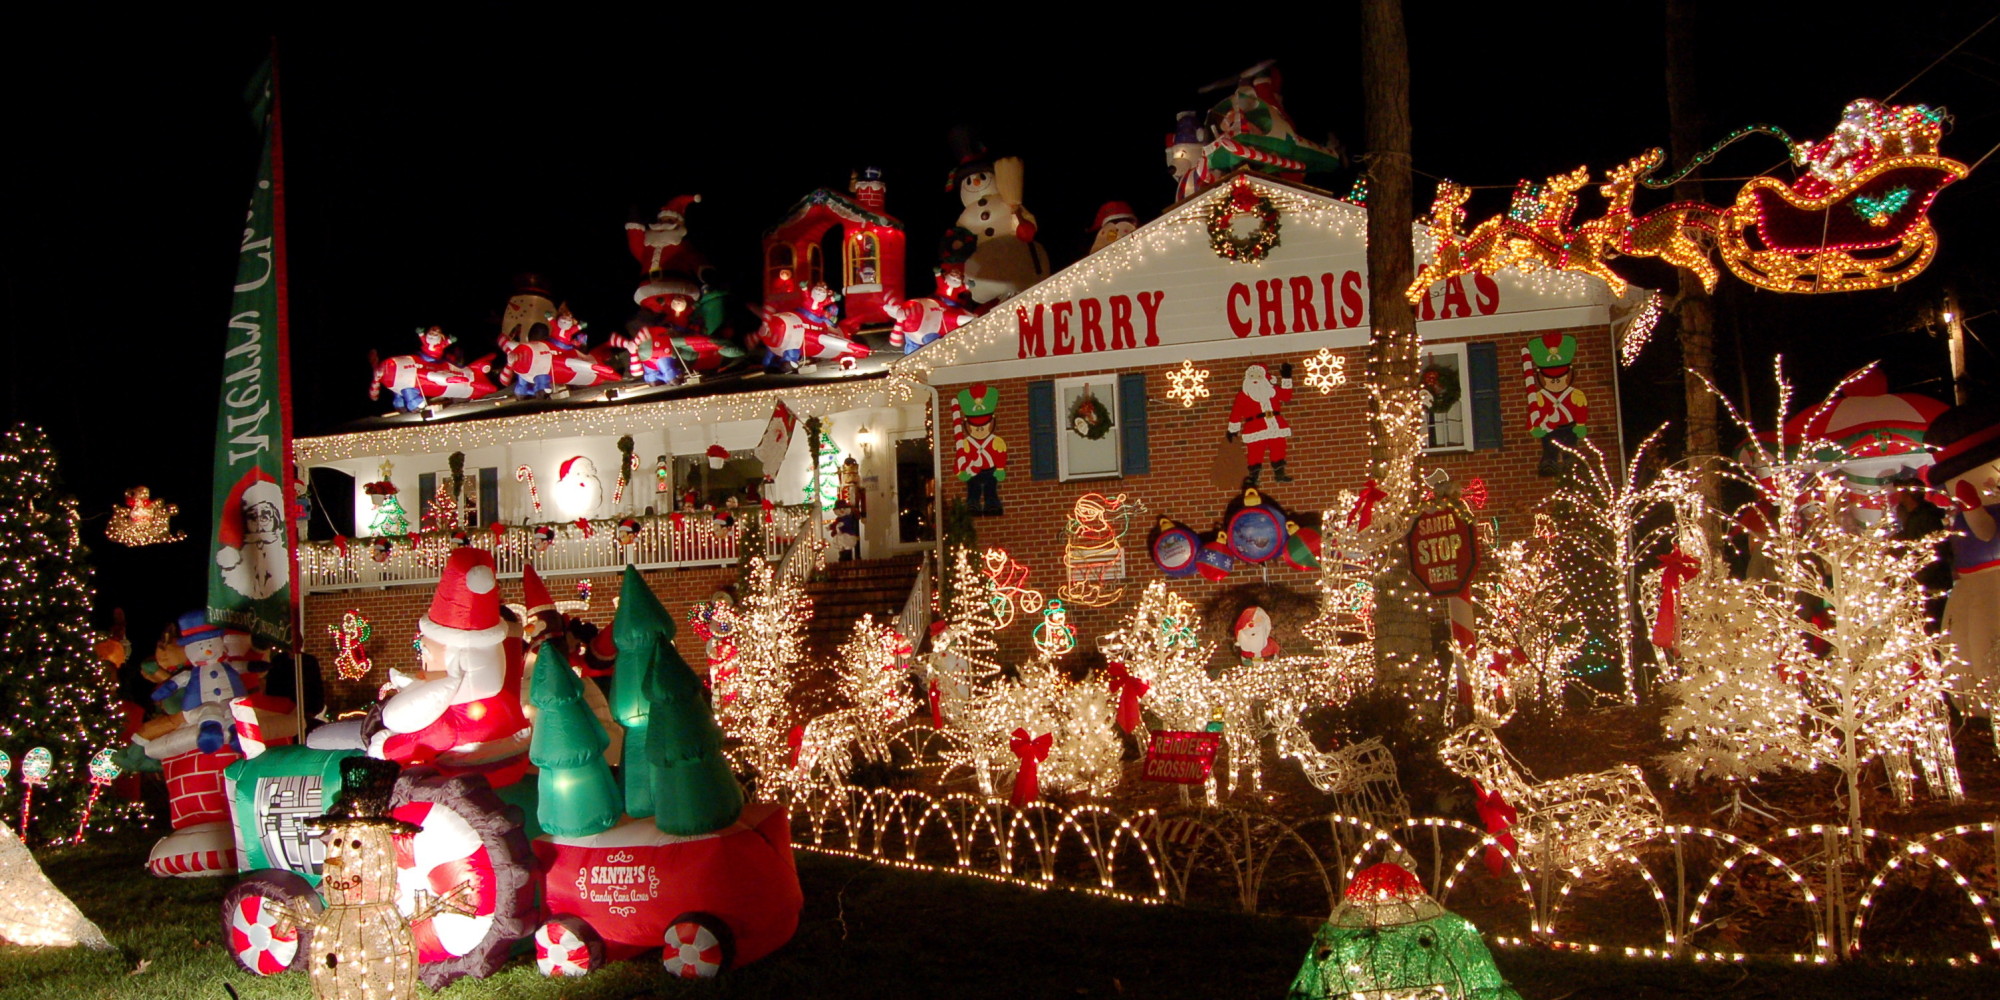 worst christmas decorations - Wouli Merry Chris Ic